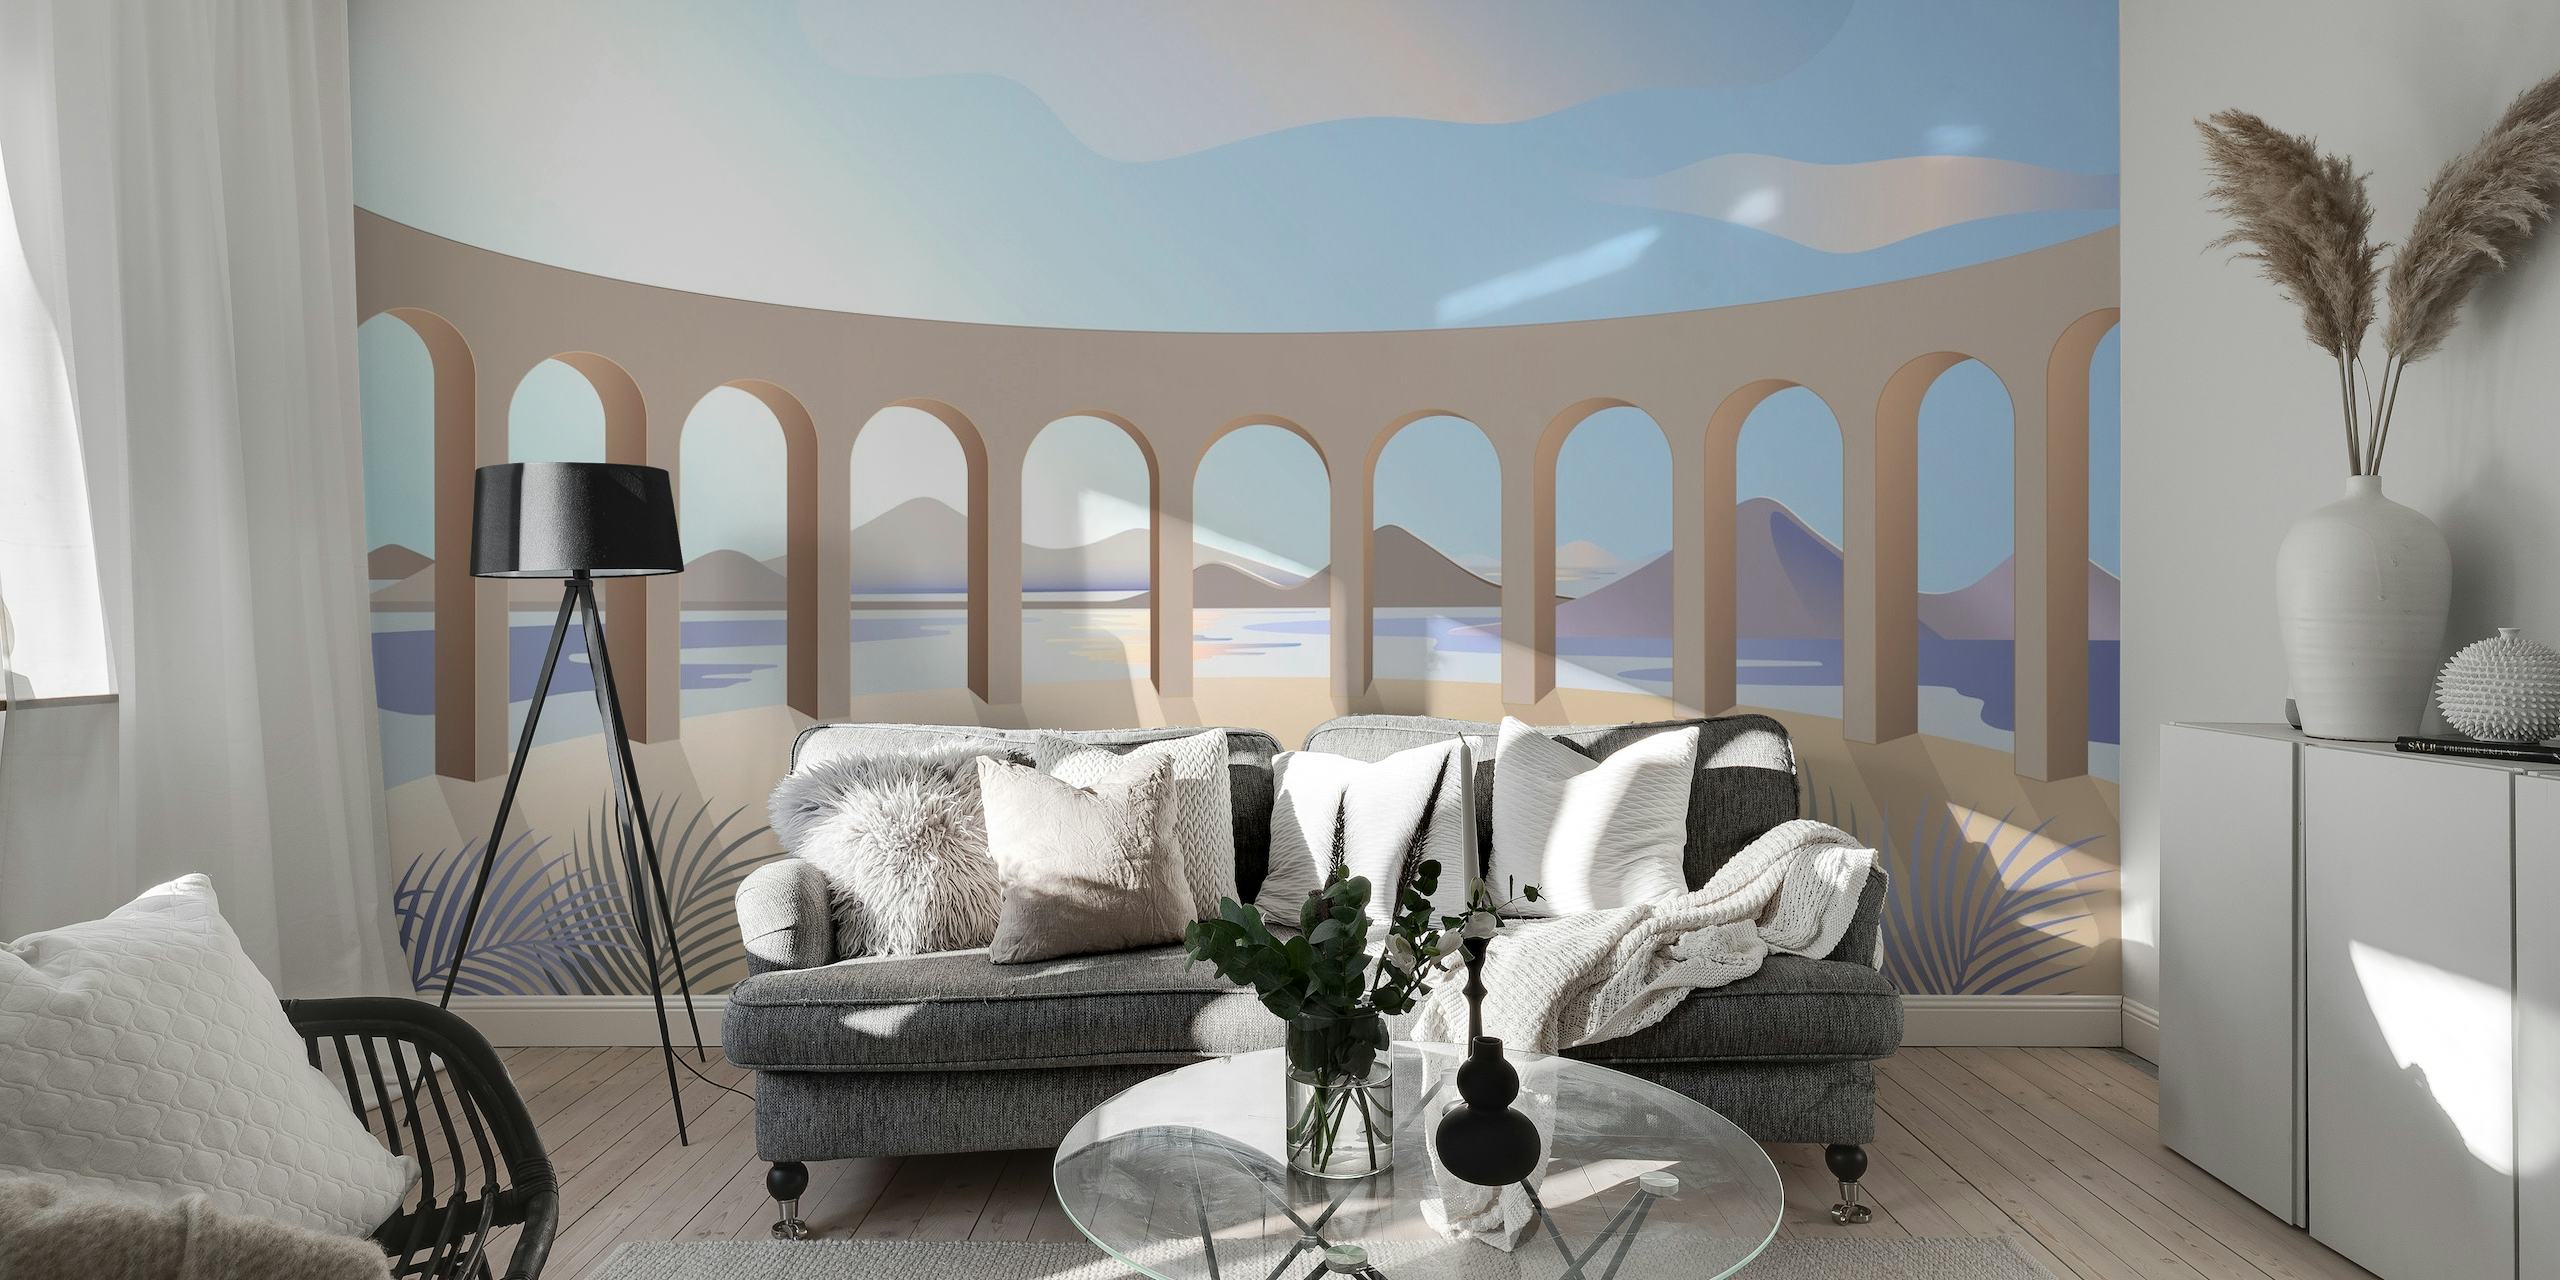 LANDSCAPE WITH EXEDRA wallpaper